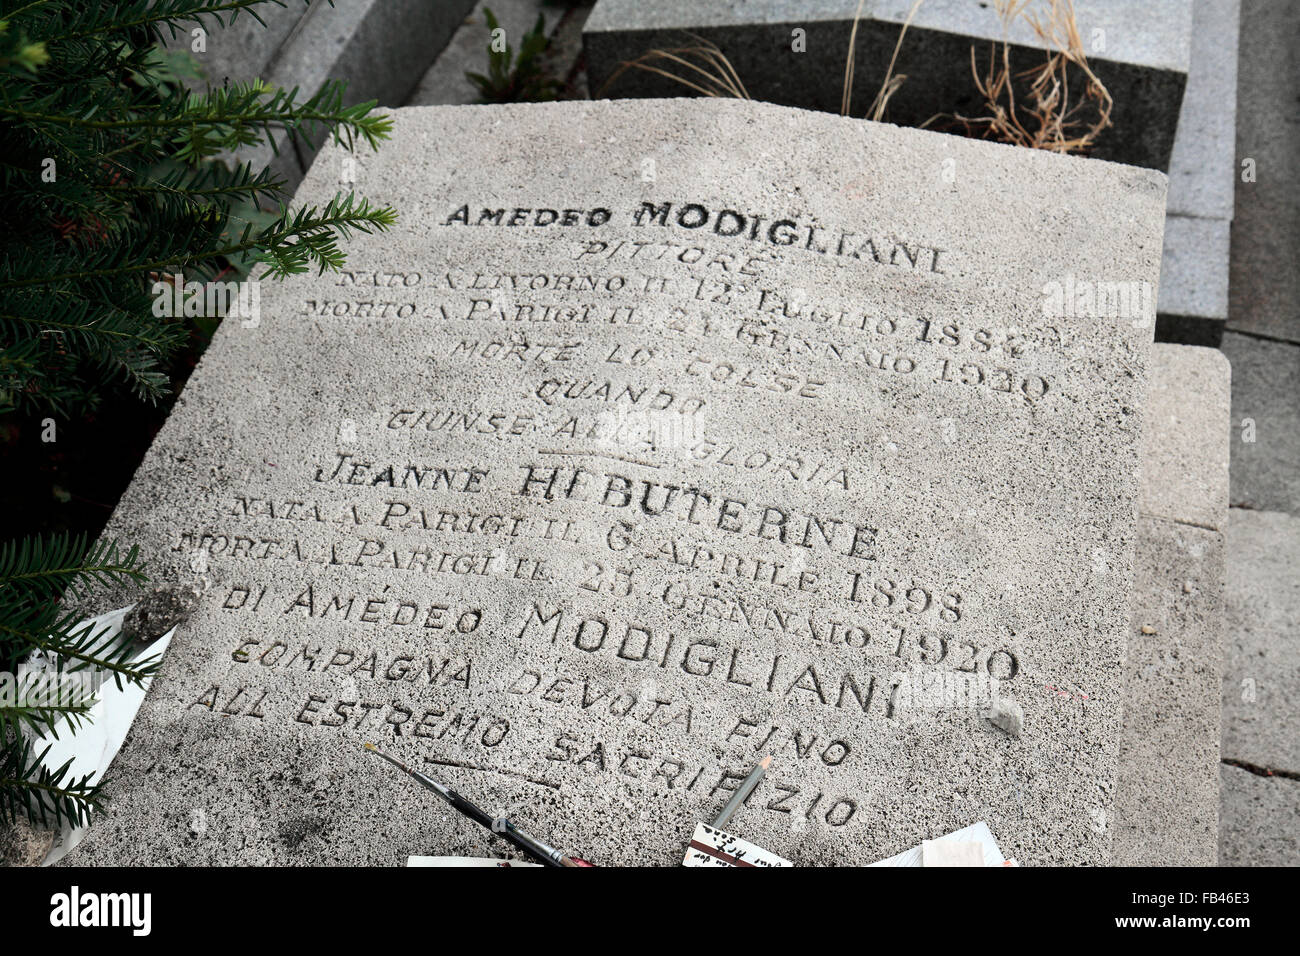 The grave of Amedeo Modigliani and Jeanne Hébuterne in the Père Lachaise Cemetery, Paris, France. Stock Photo